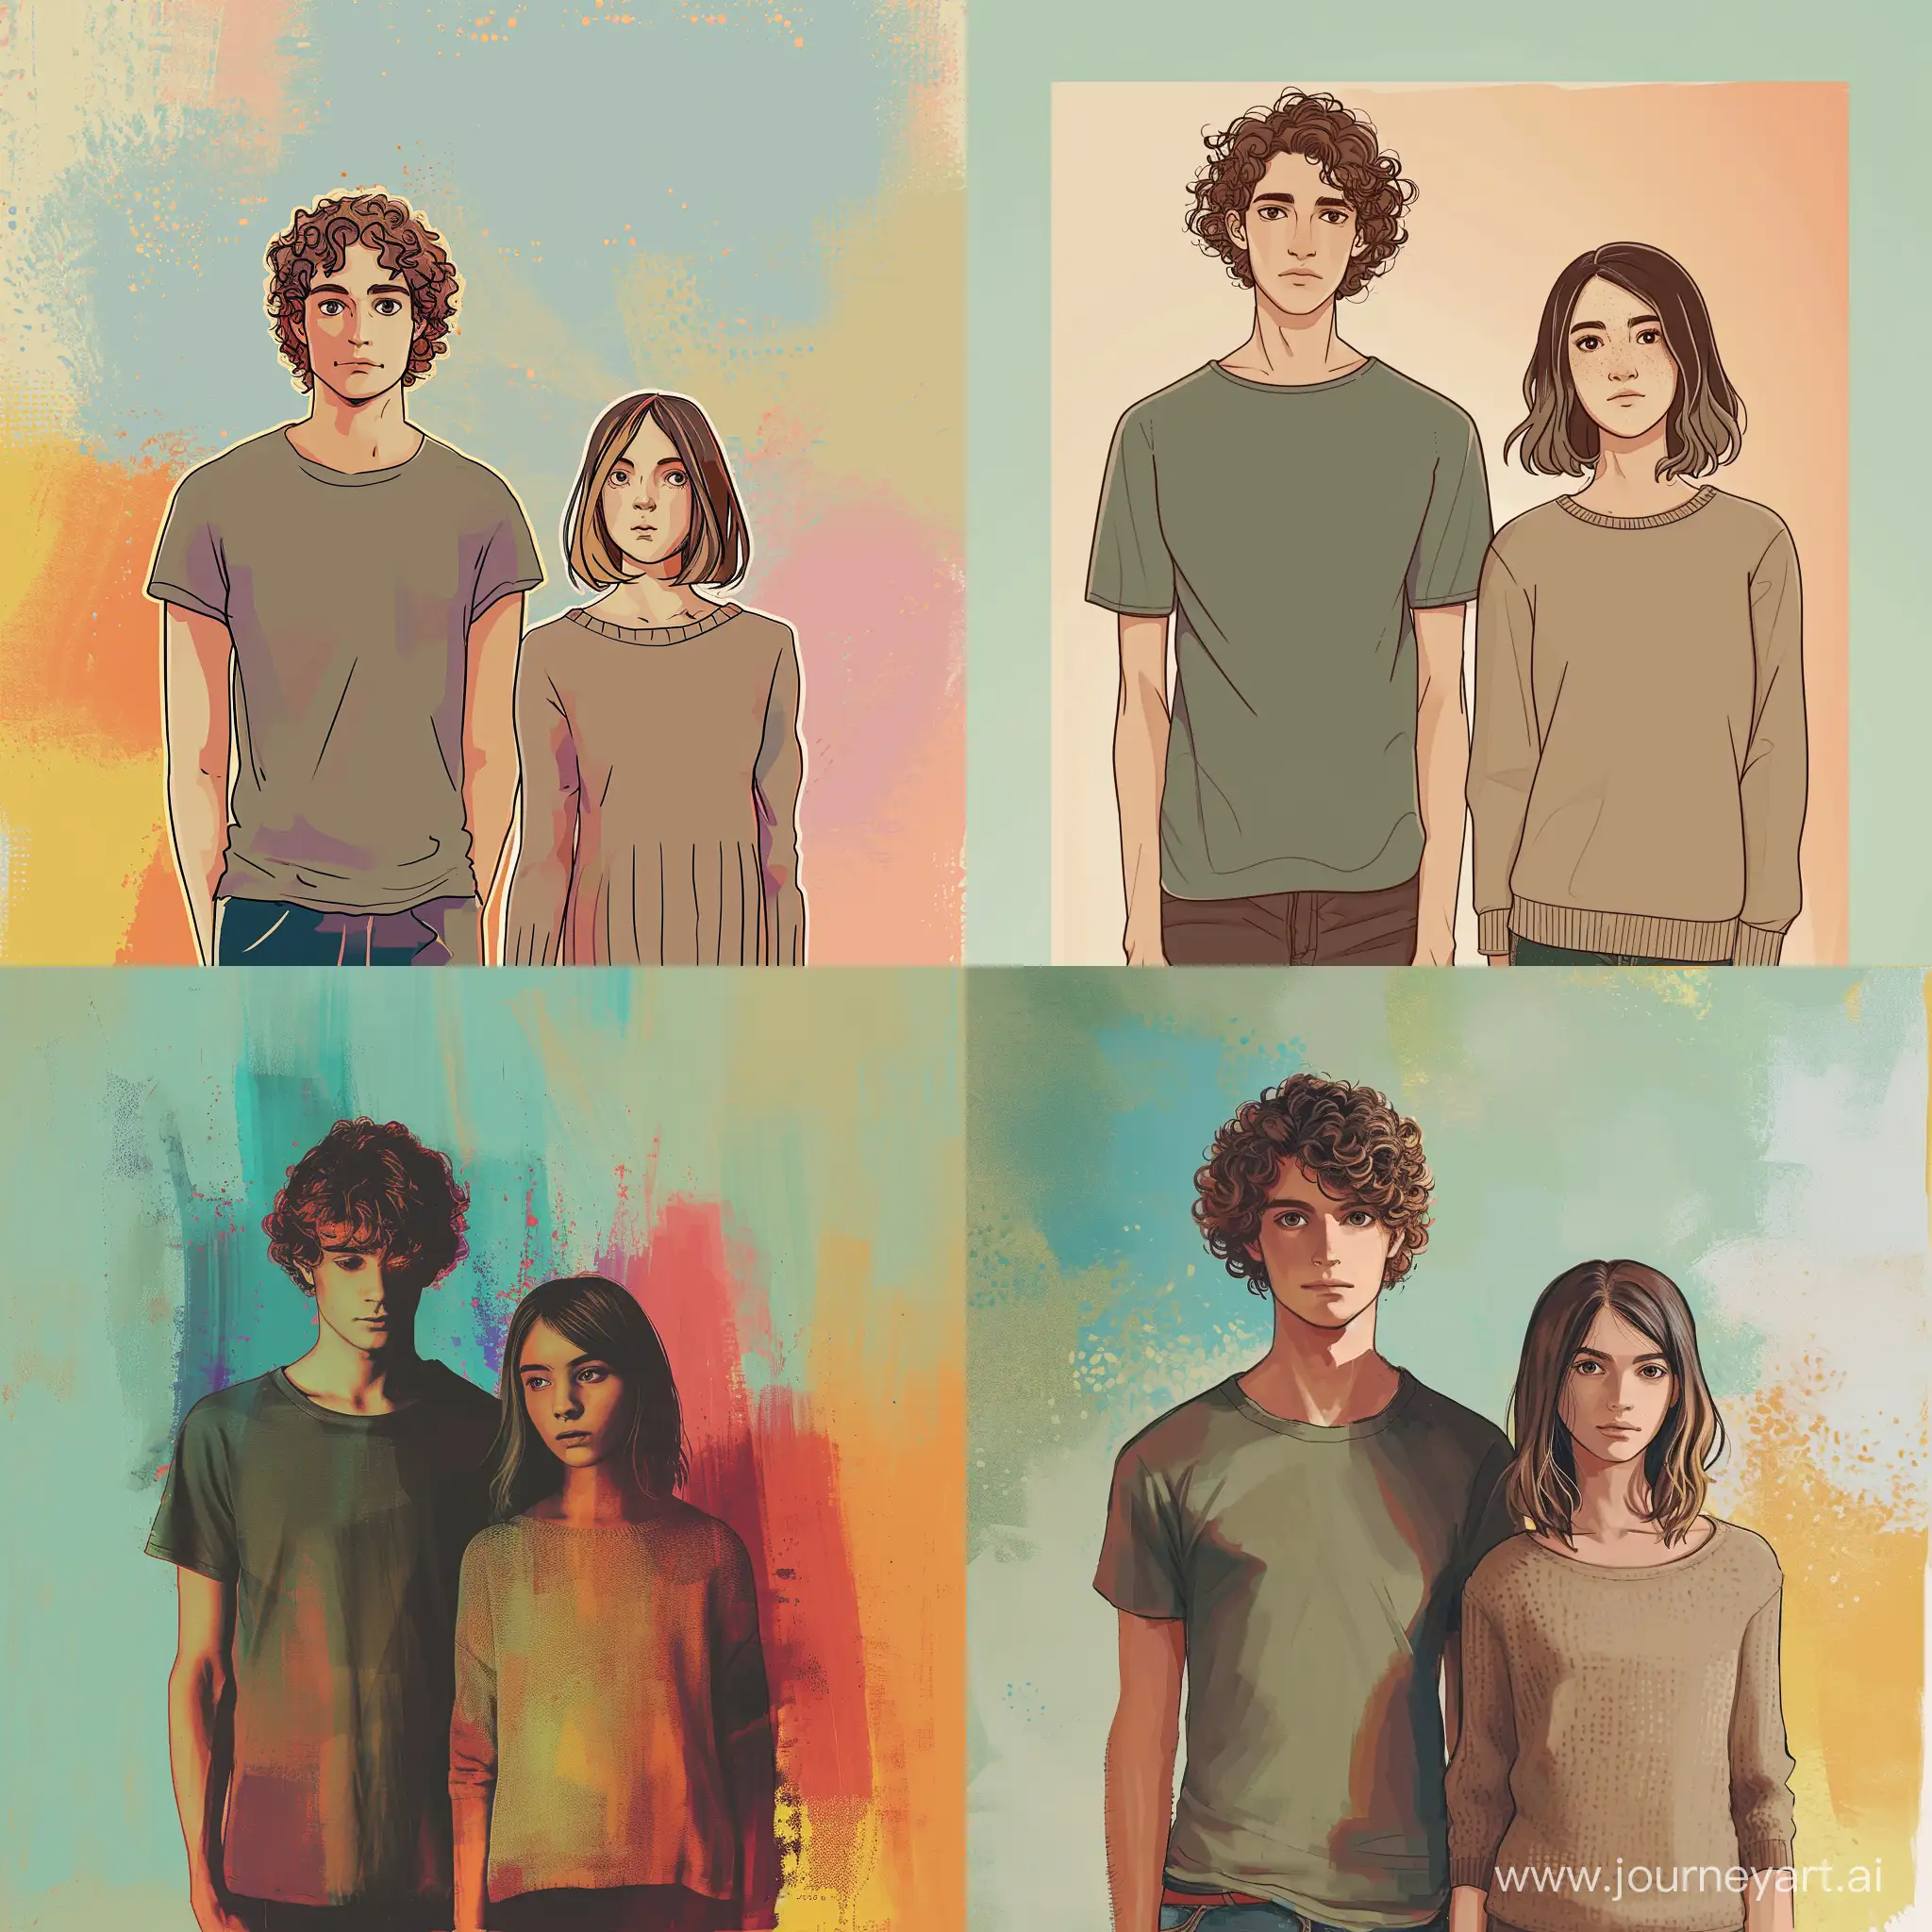 Tall-Guy-and-Short-Girl-Abstract-Art-with-Brown-TShirt-and-Sweater